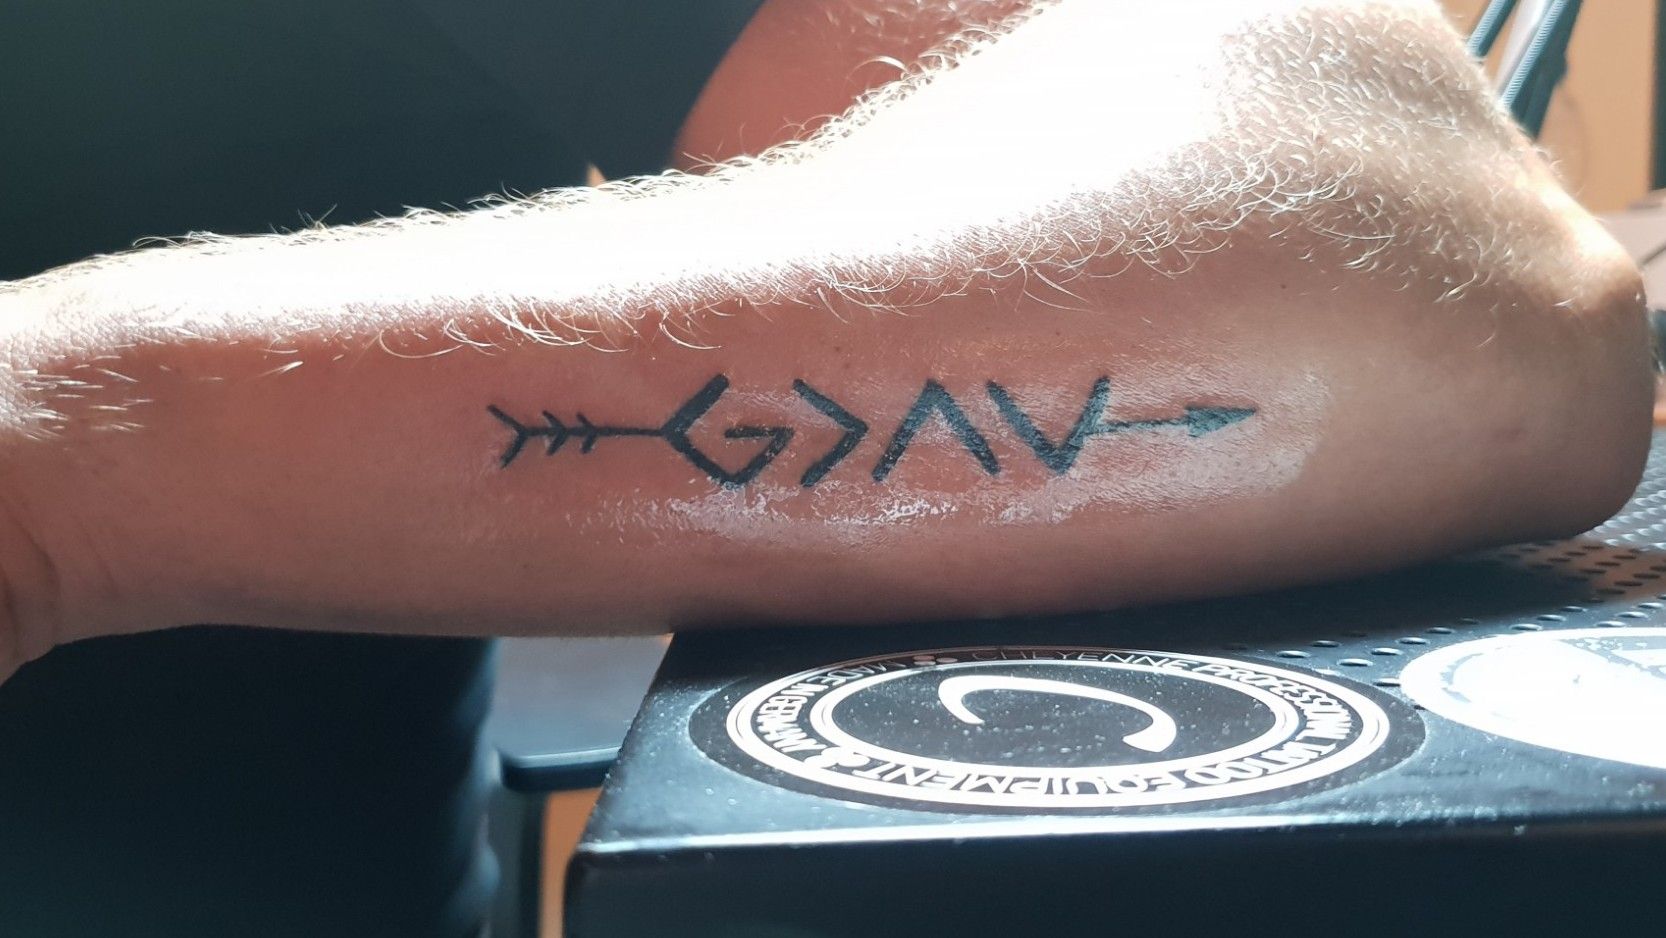 Tattoo uploaded by Jad Abi Haila • God is greater than the high and low • Tattoodo